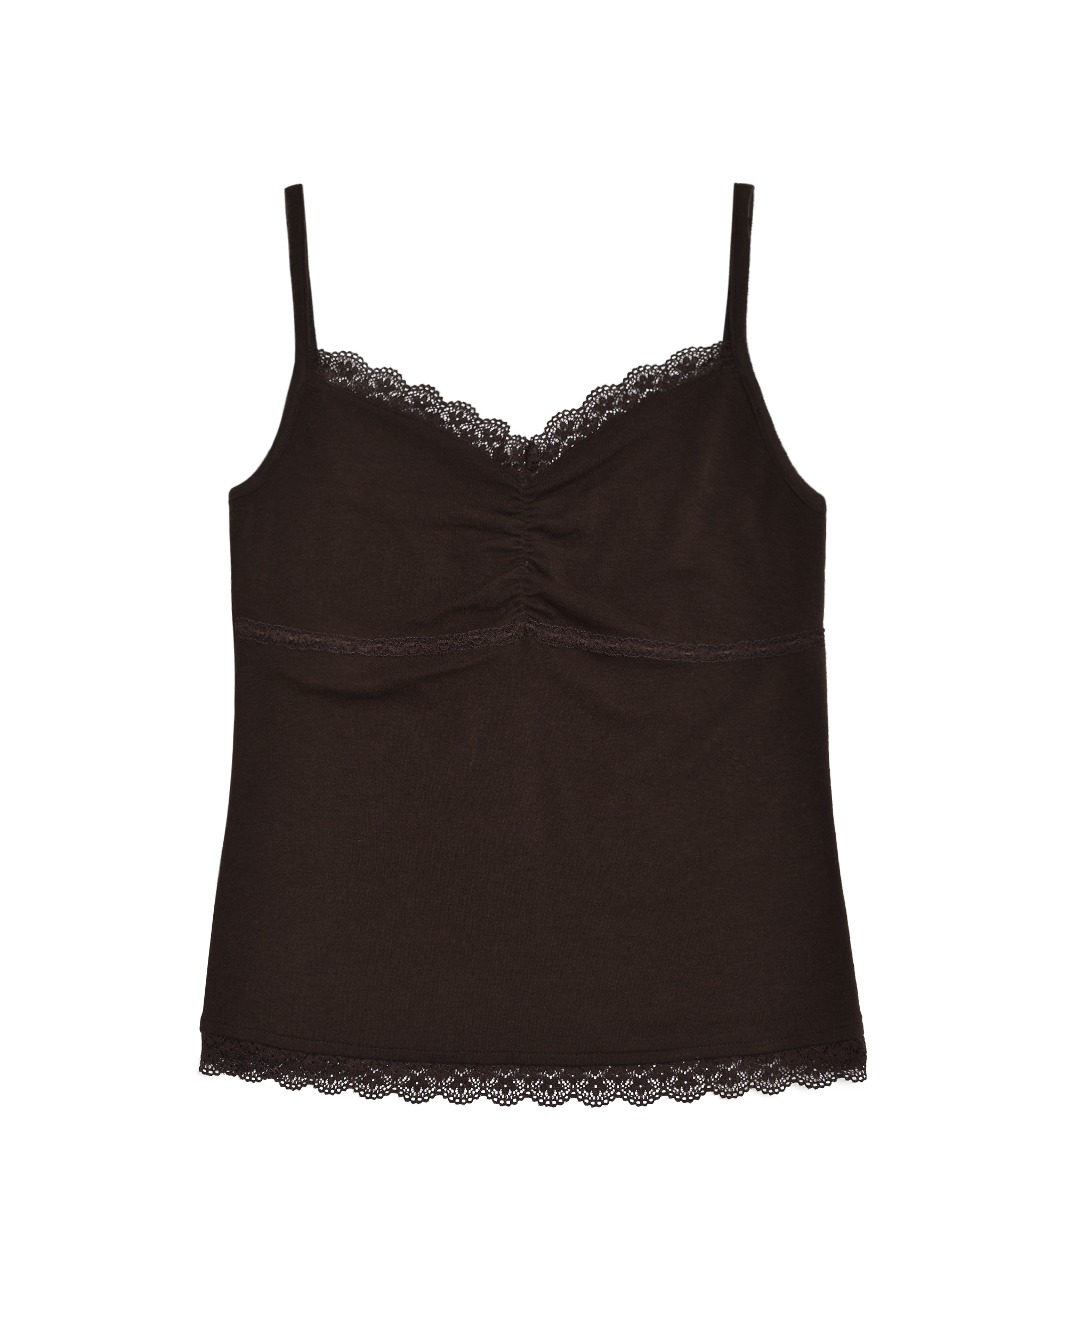 Lace Tank Top (Brown)